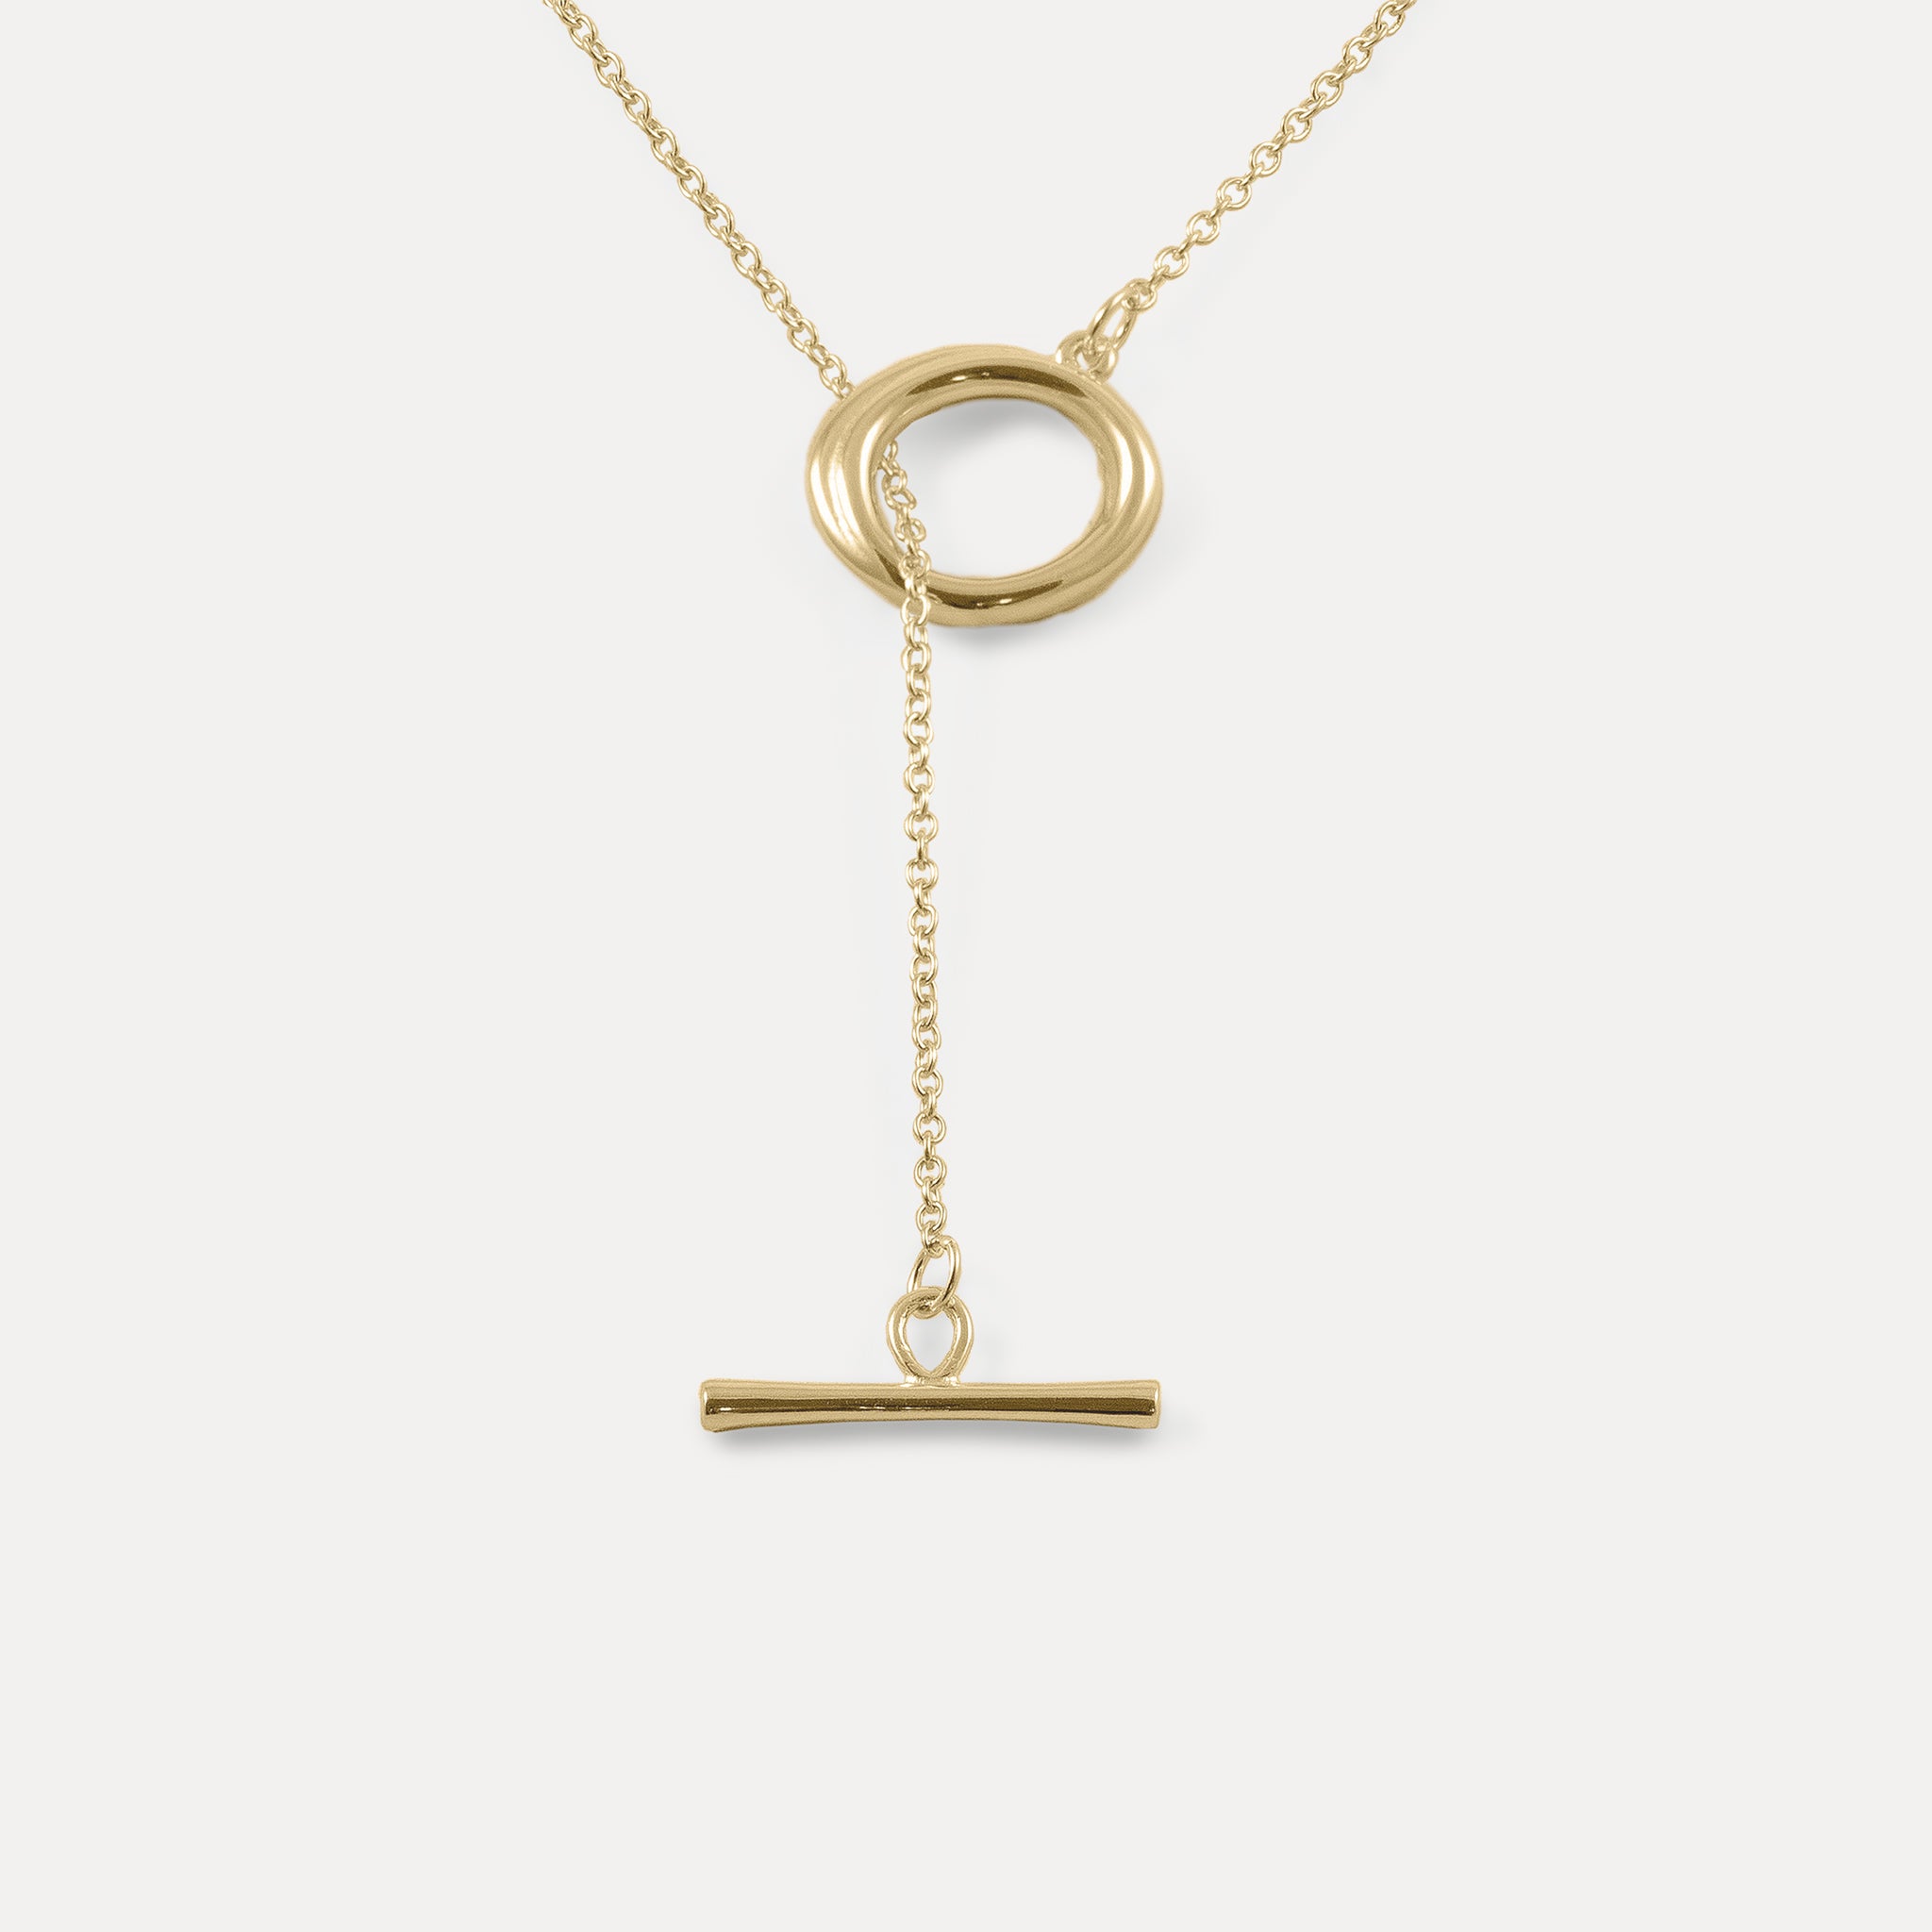 Bonds Path Loop Necklace - 14ct Solid Gold